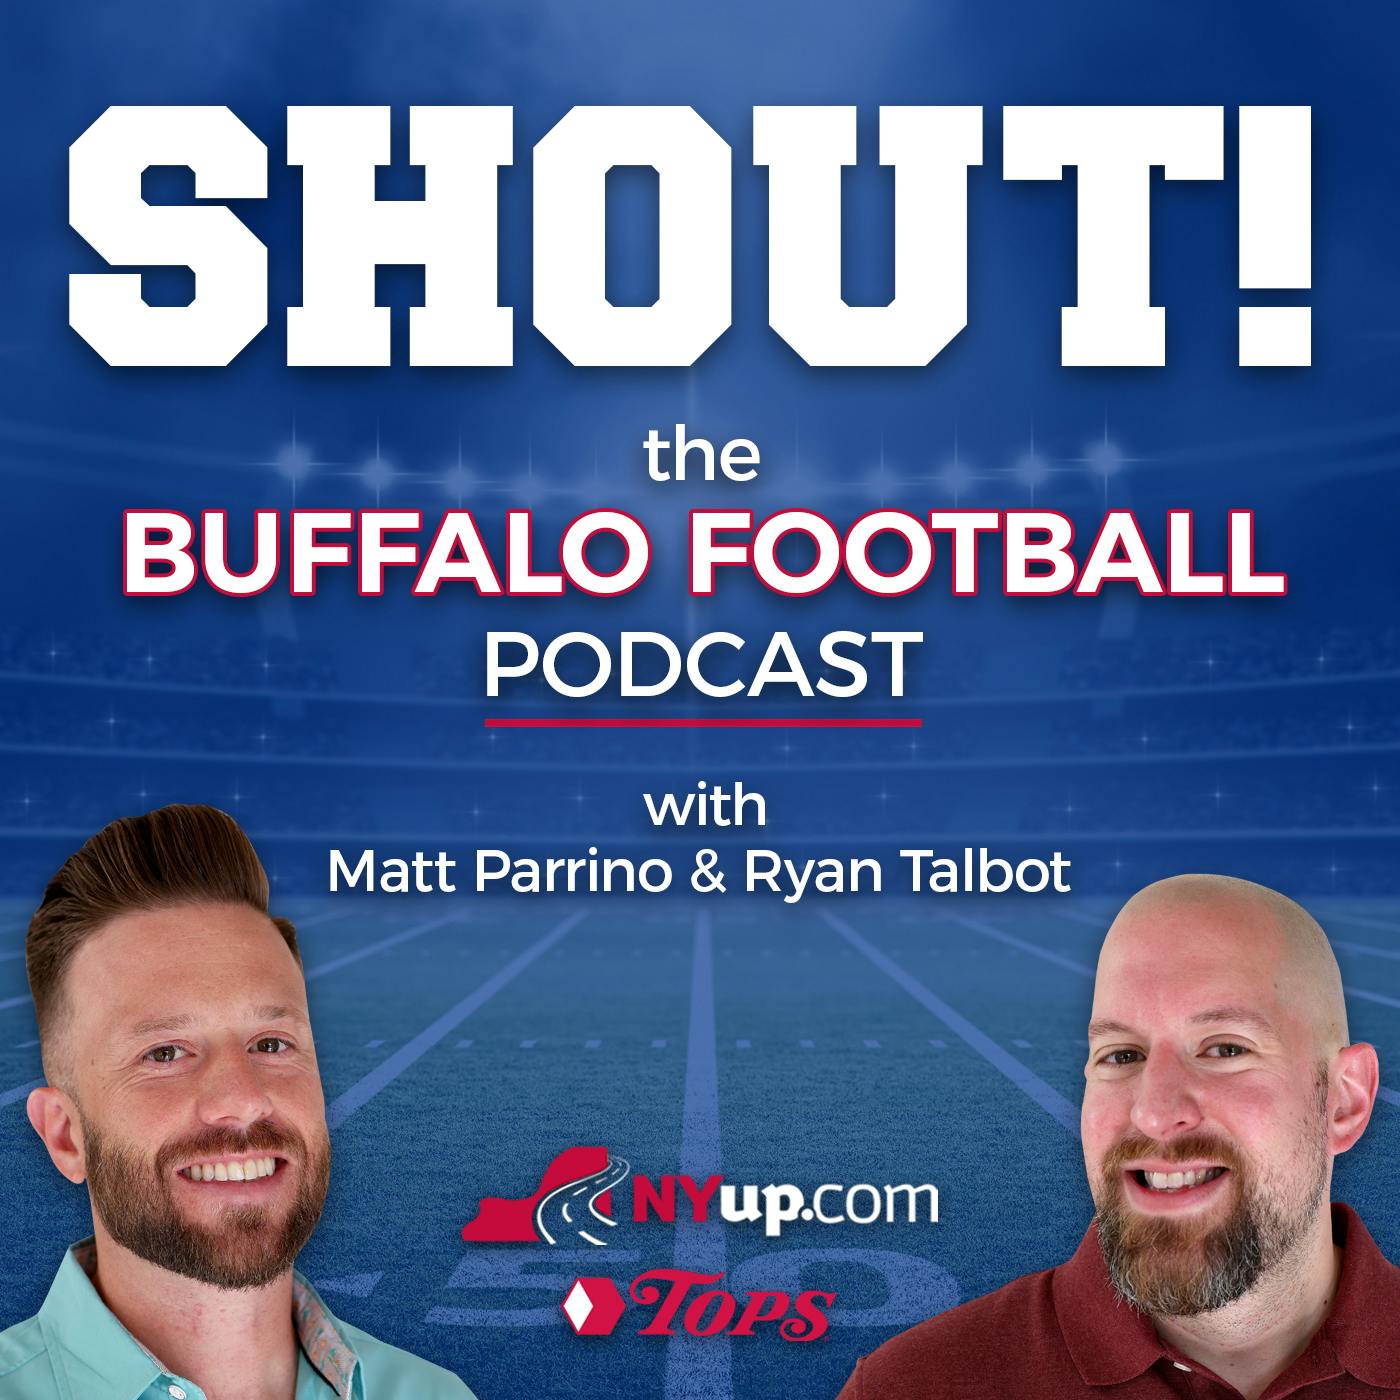 Having the Josh Allen should be MVP conversation + Whether the Bills should bench Von Miller + What's up with Stefon Diggs